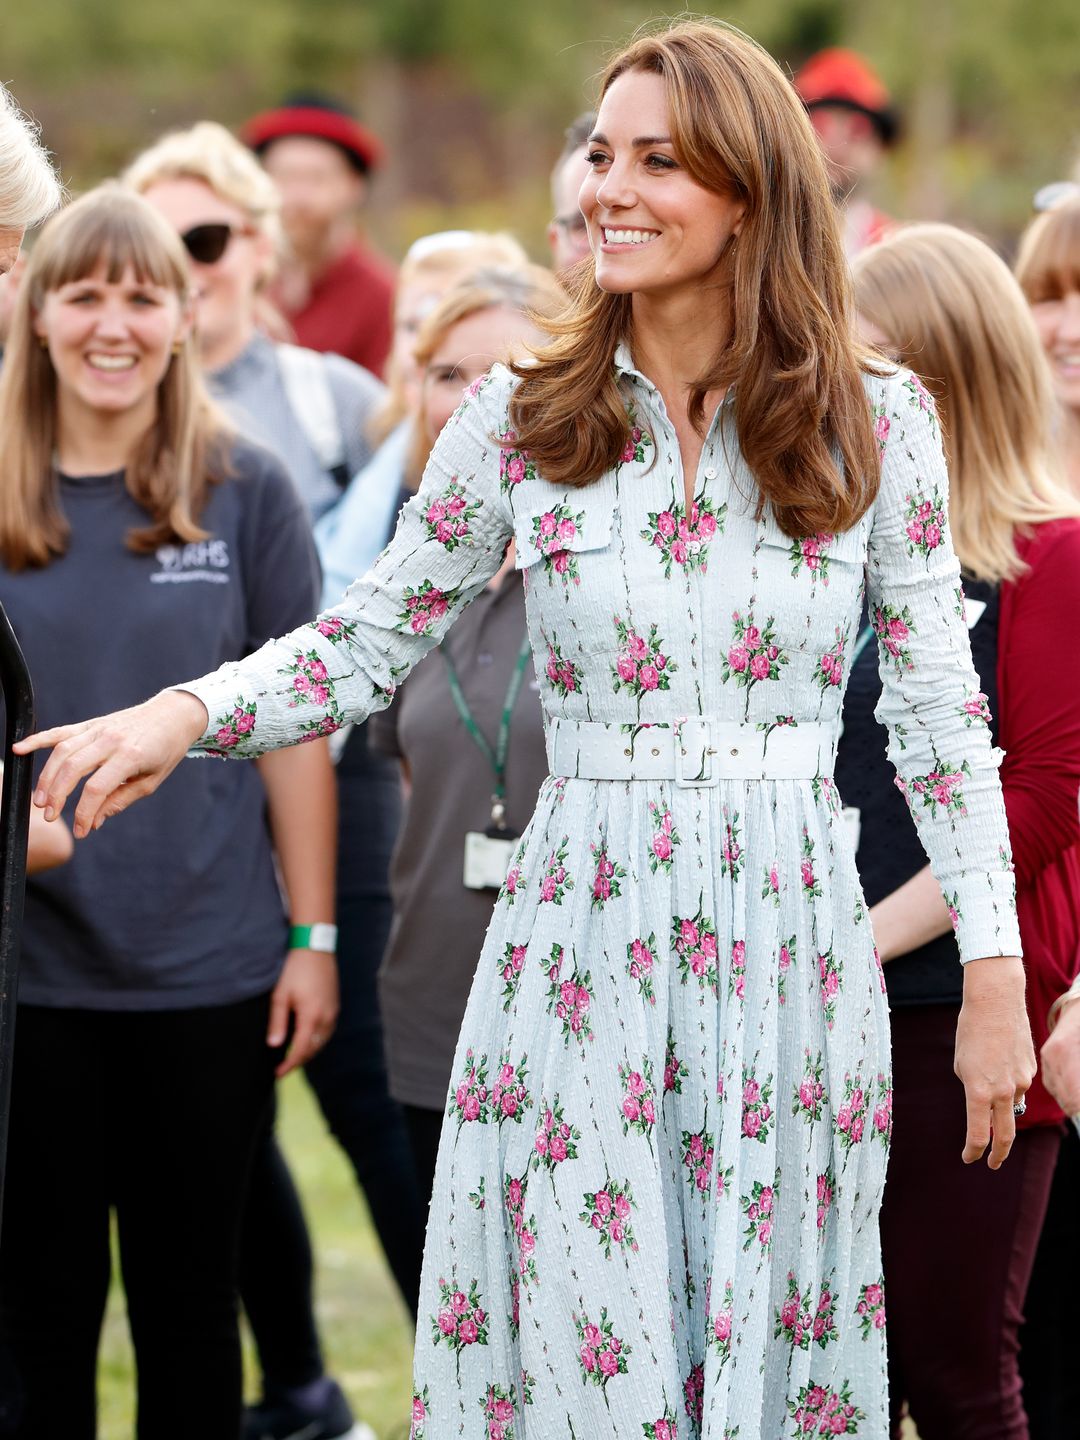 Princess Kate is also a fan of floral shirt dresses